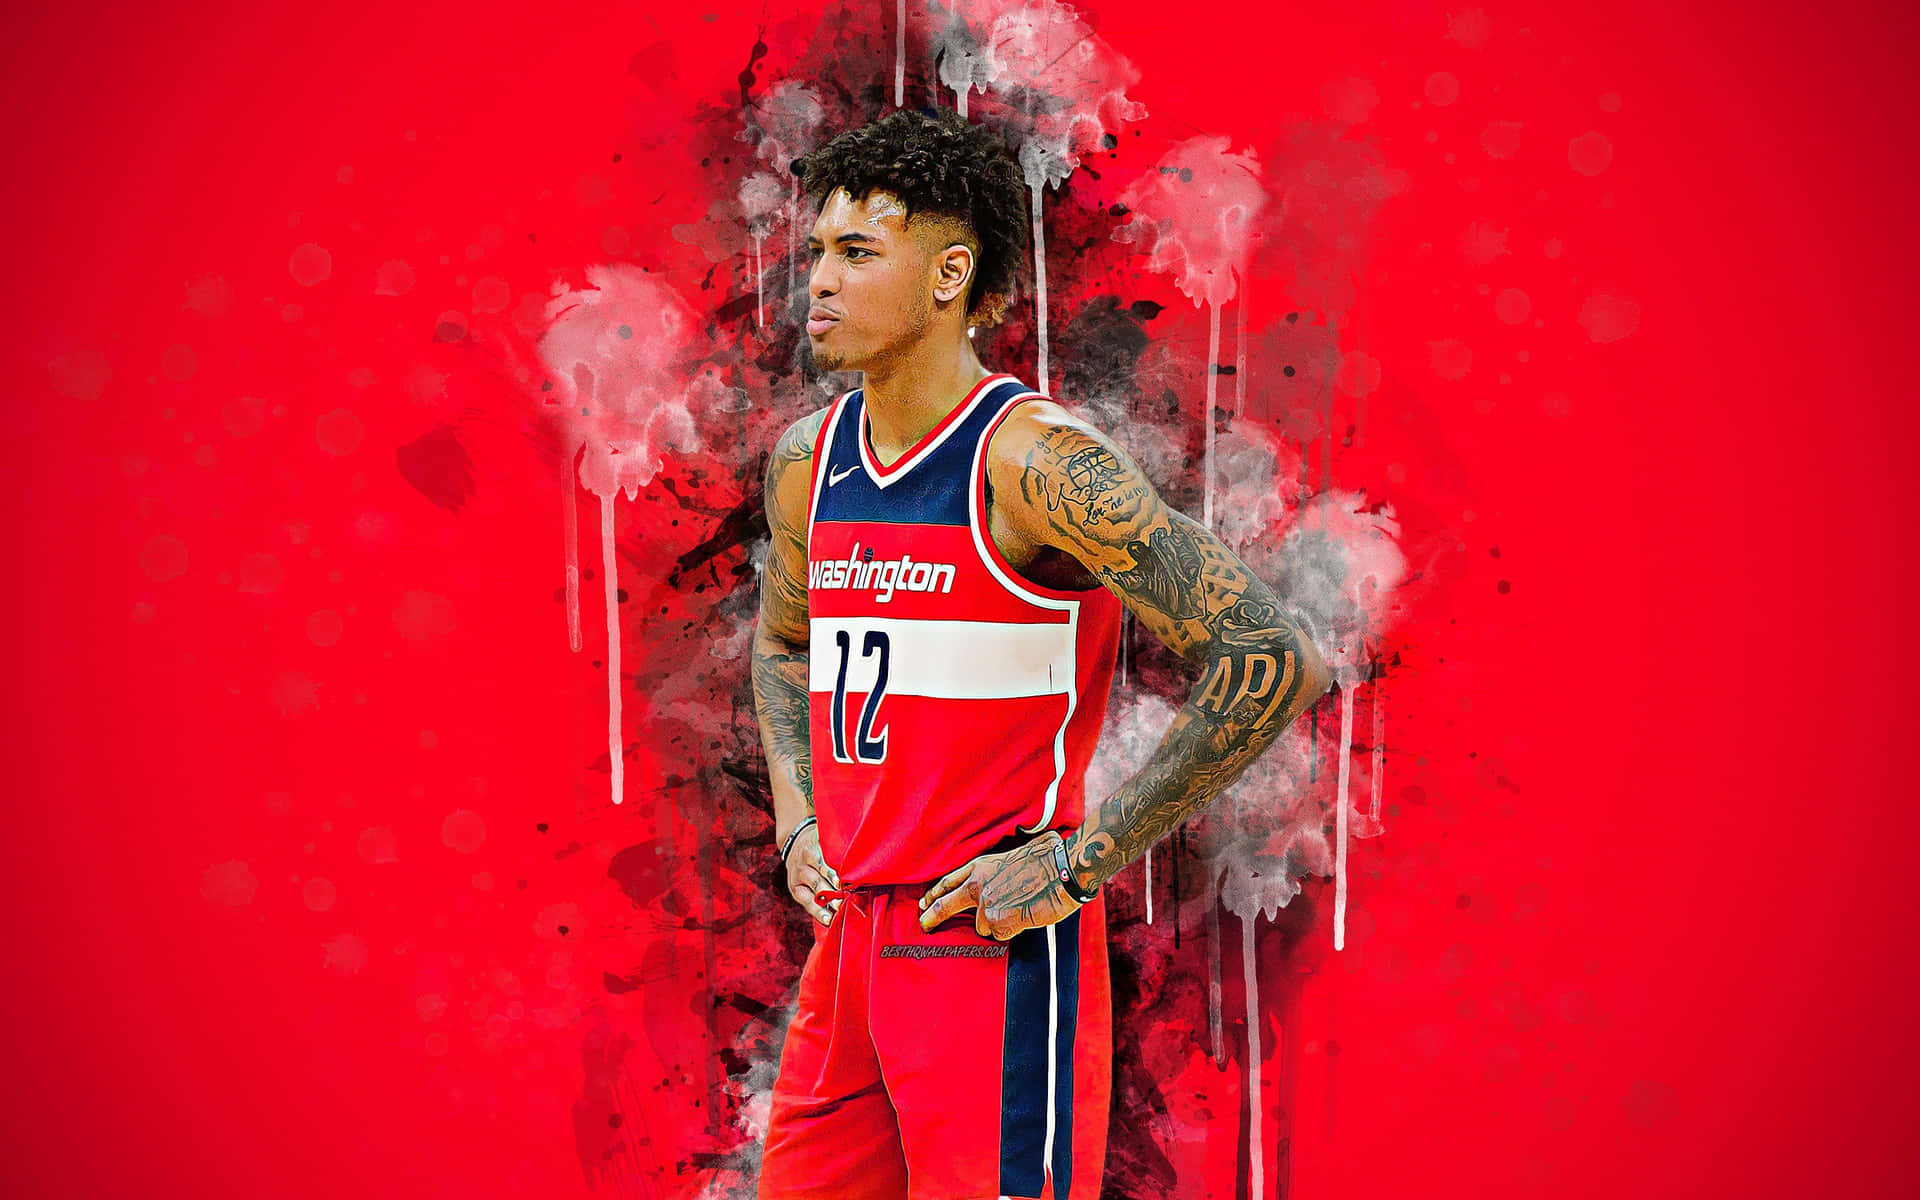 a basketball player with tattoos standing in front of a red background Wallpaper